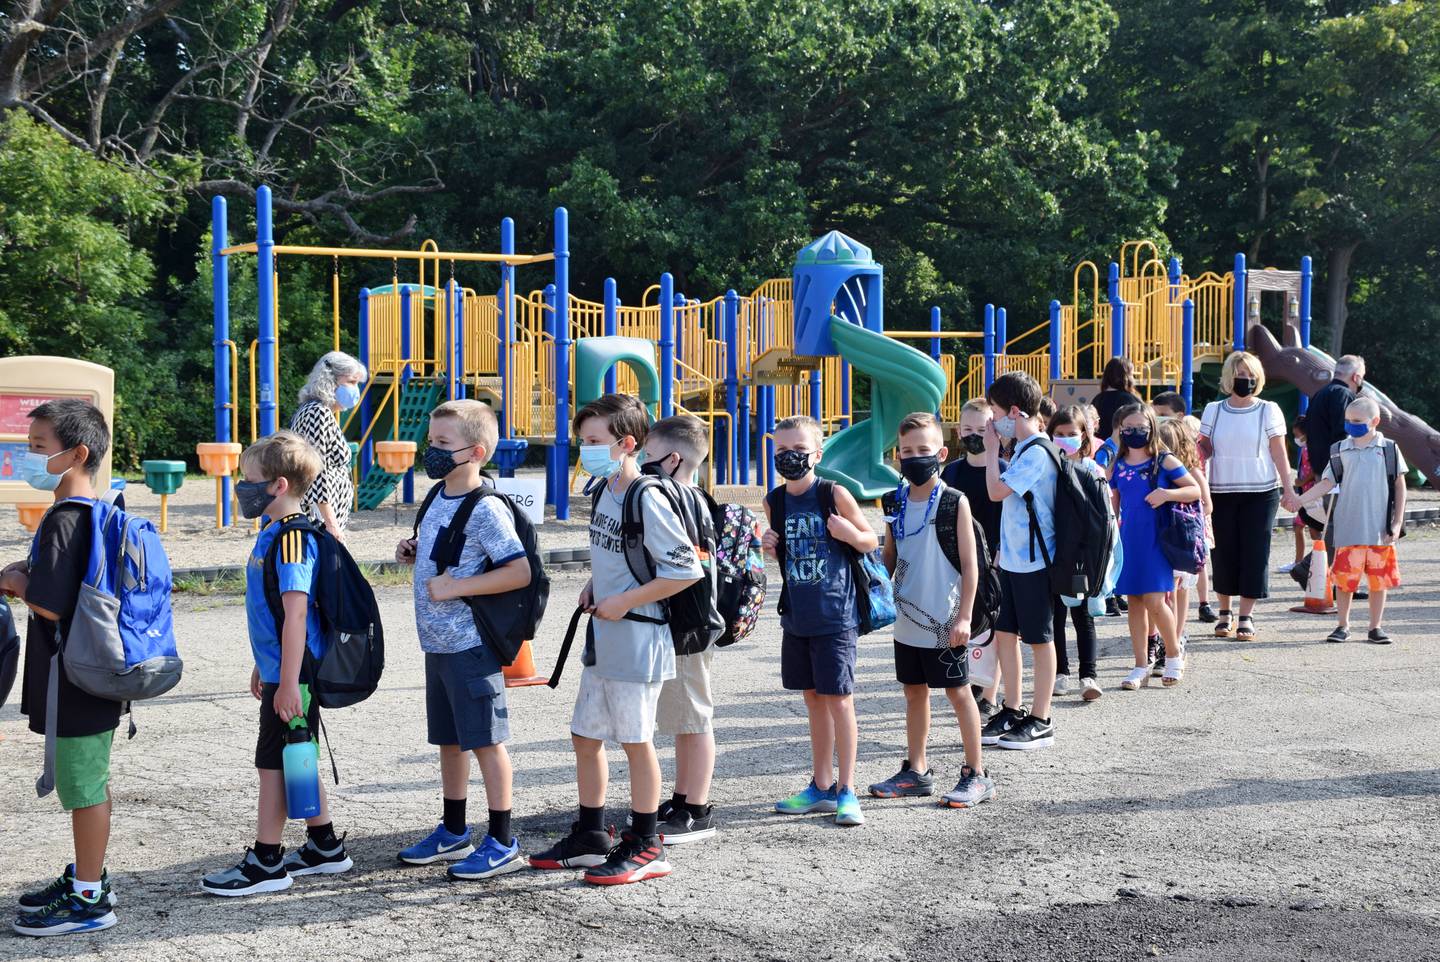 Students line up to enter North Elementary School in Sycamore for the first day of the 2021-2022 school year on Wednesday.